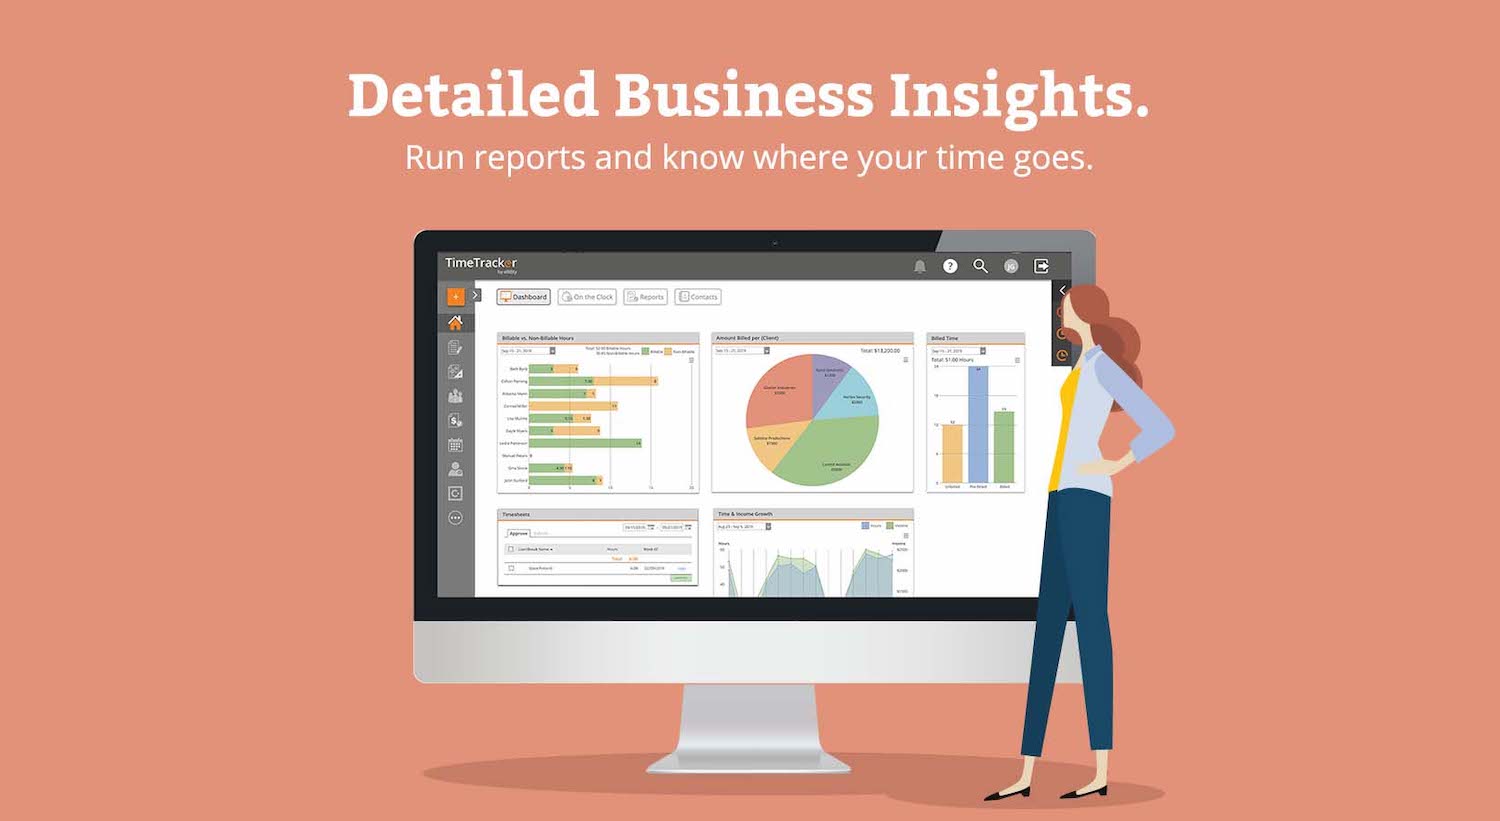 Know where time goes with detailed business insights.